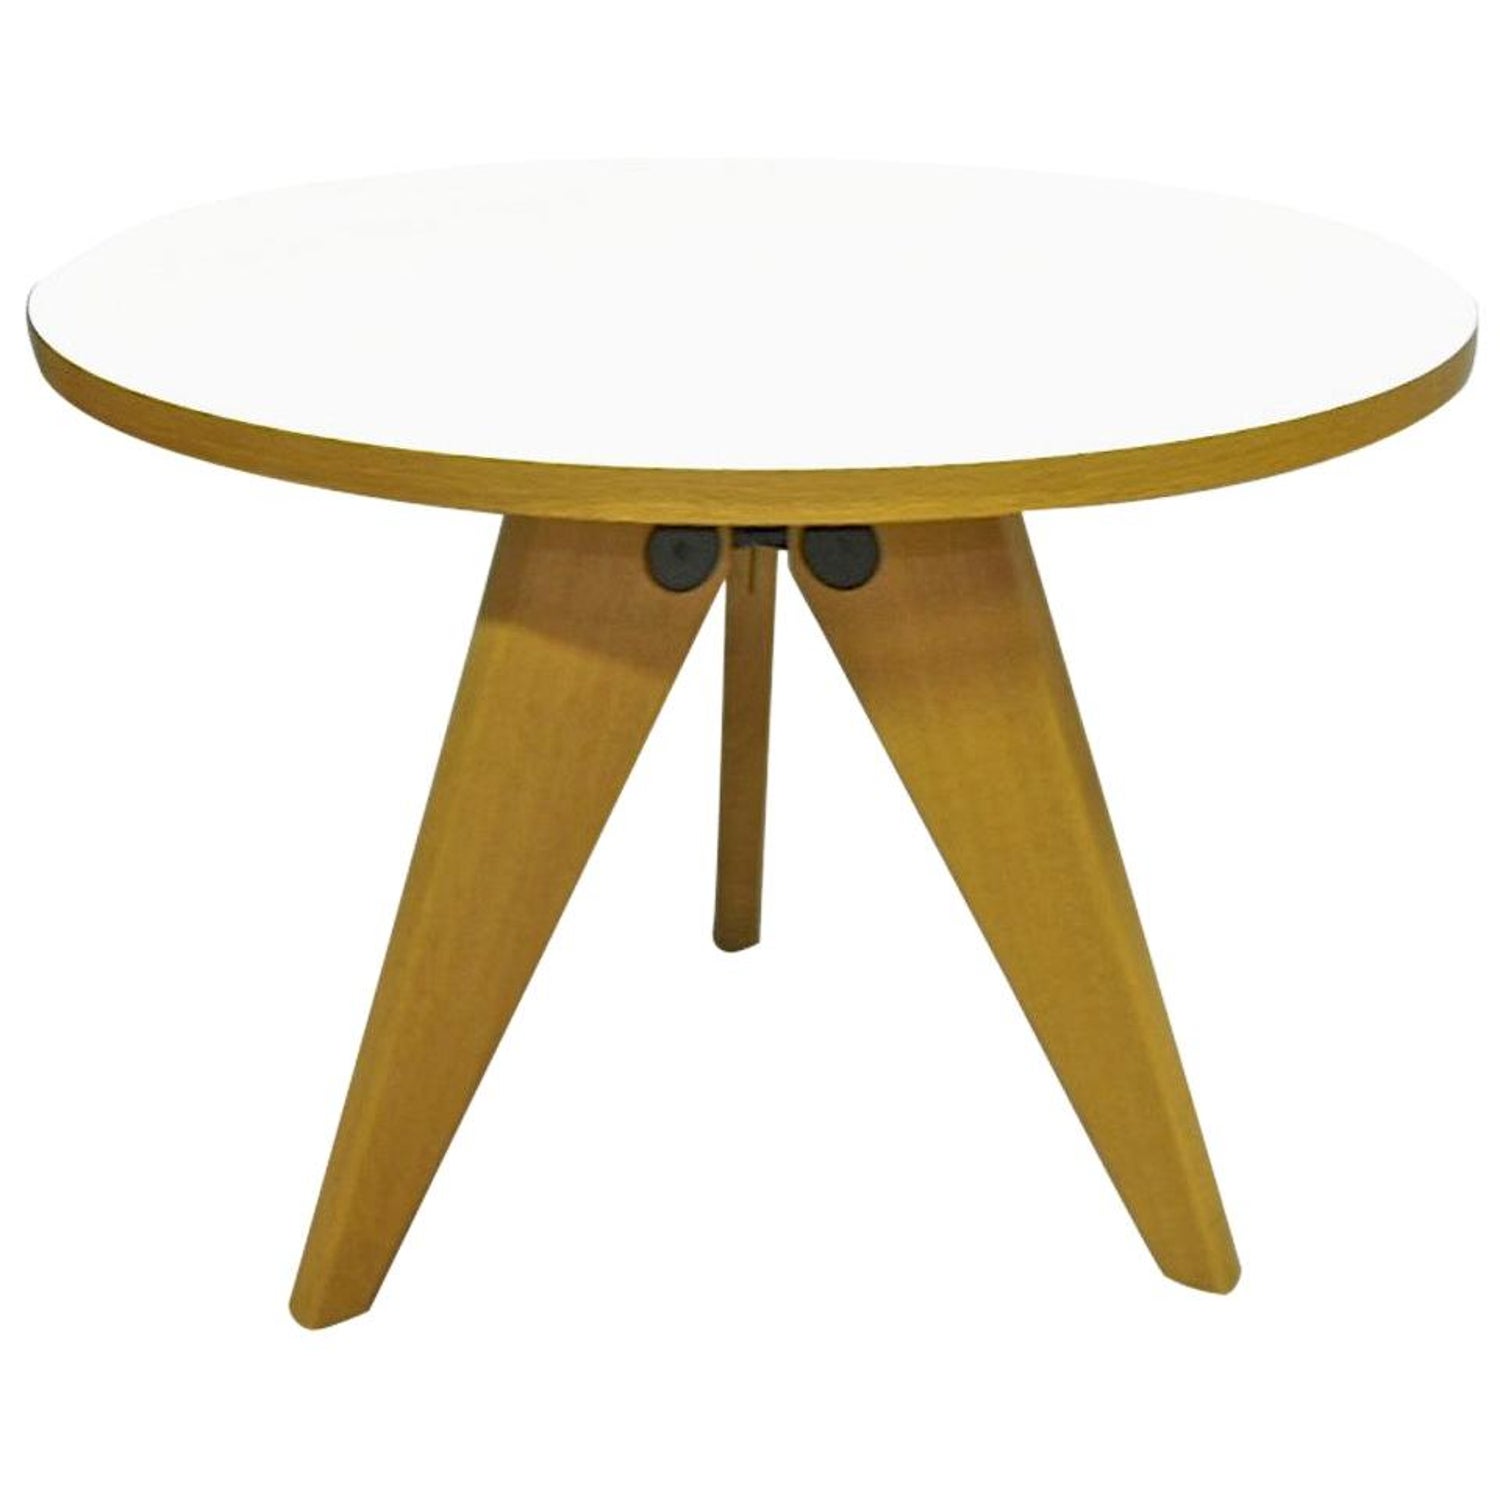 Gueridon Table by Jean Prouvé 2002 Edition Vitra, Switzerland at 1stDibs